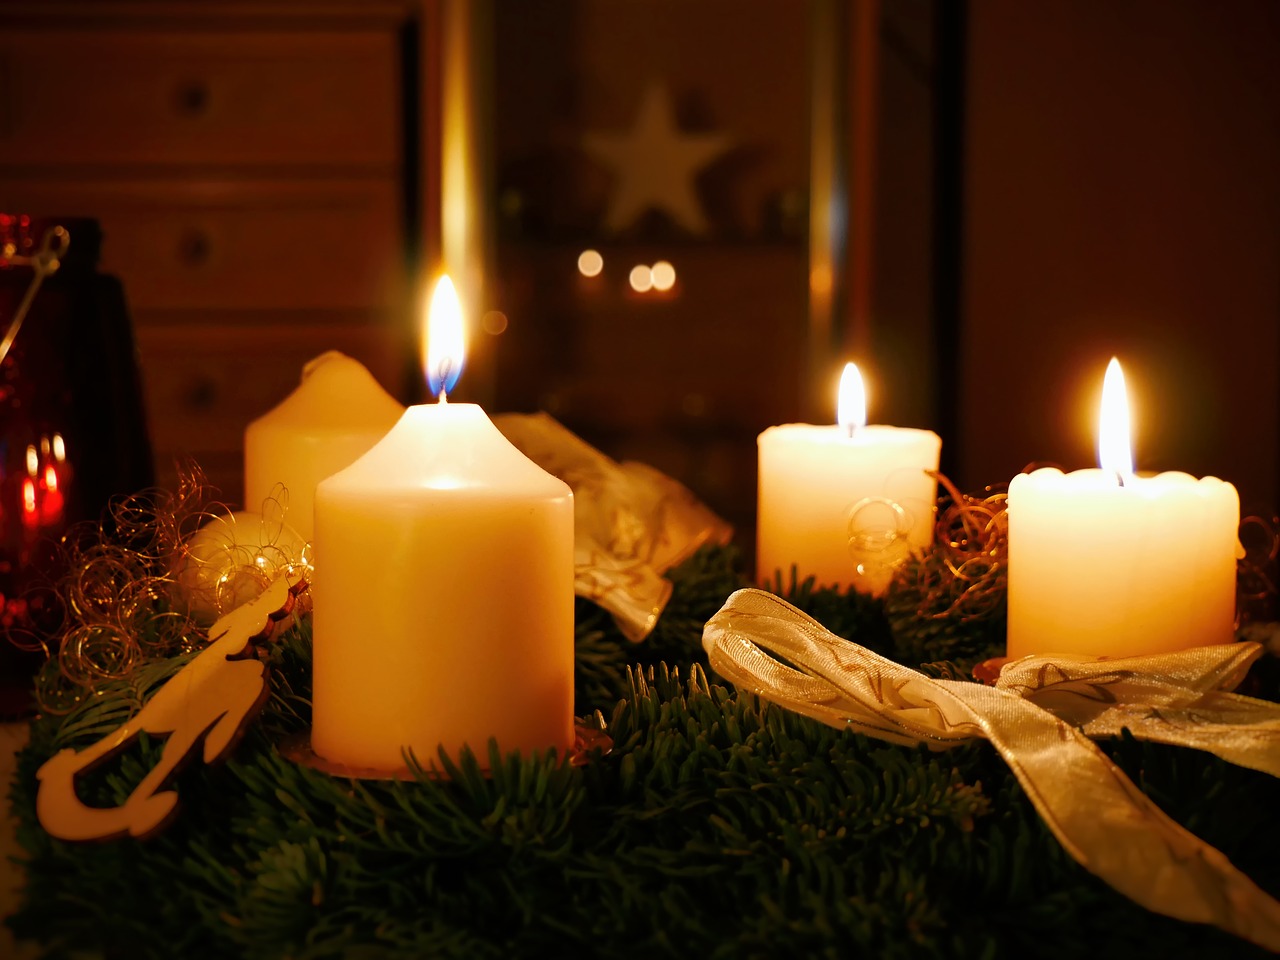 remembering deceased loved ones during the holidays